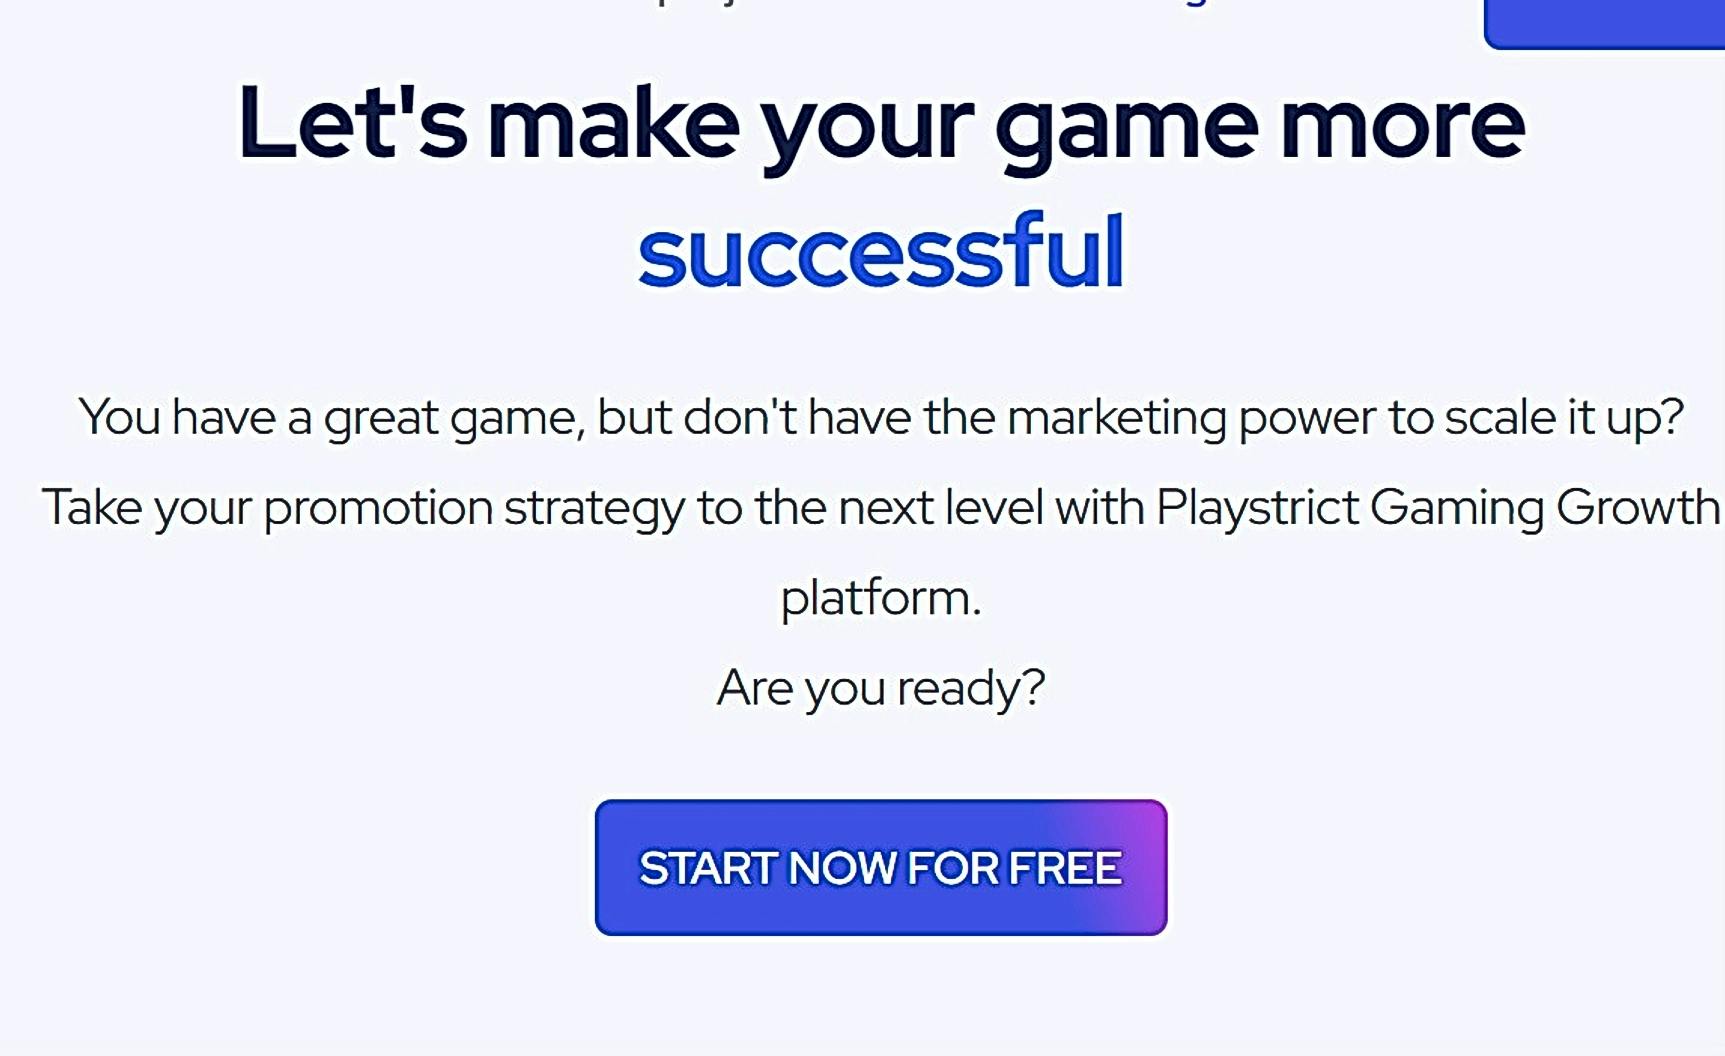 Playstrict featured